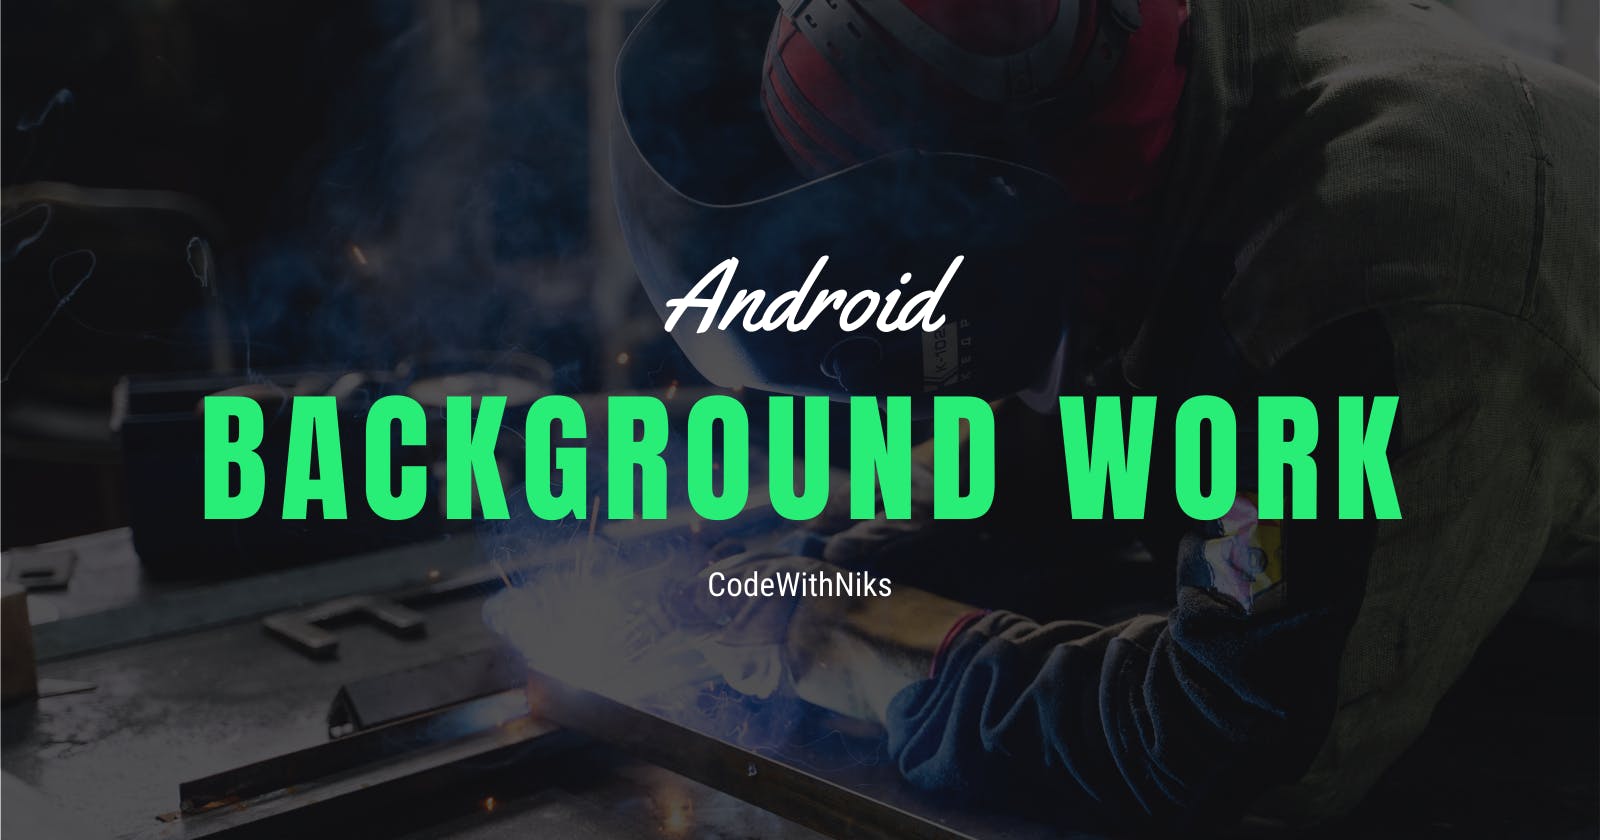 Background work in Android